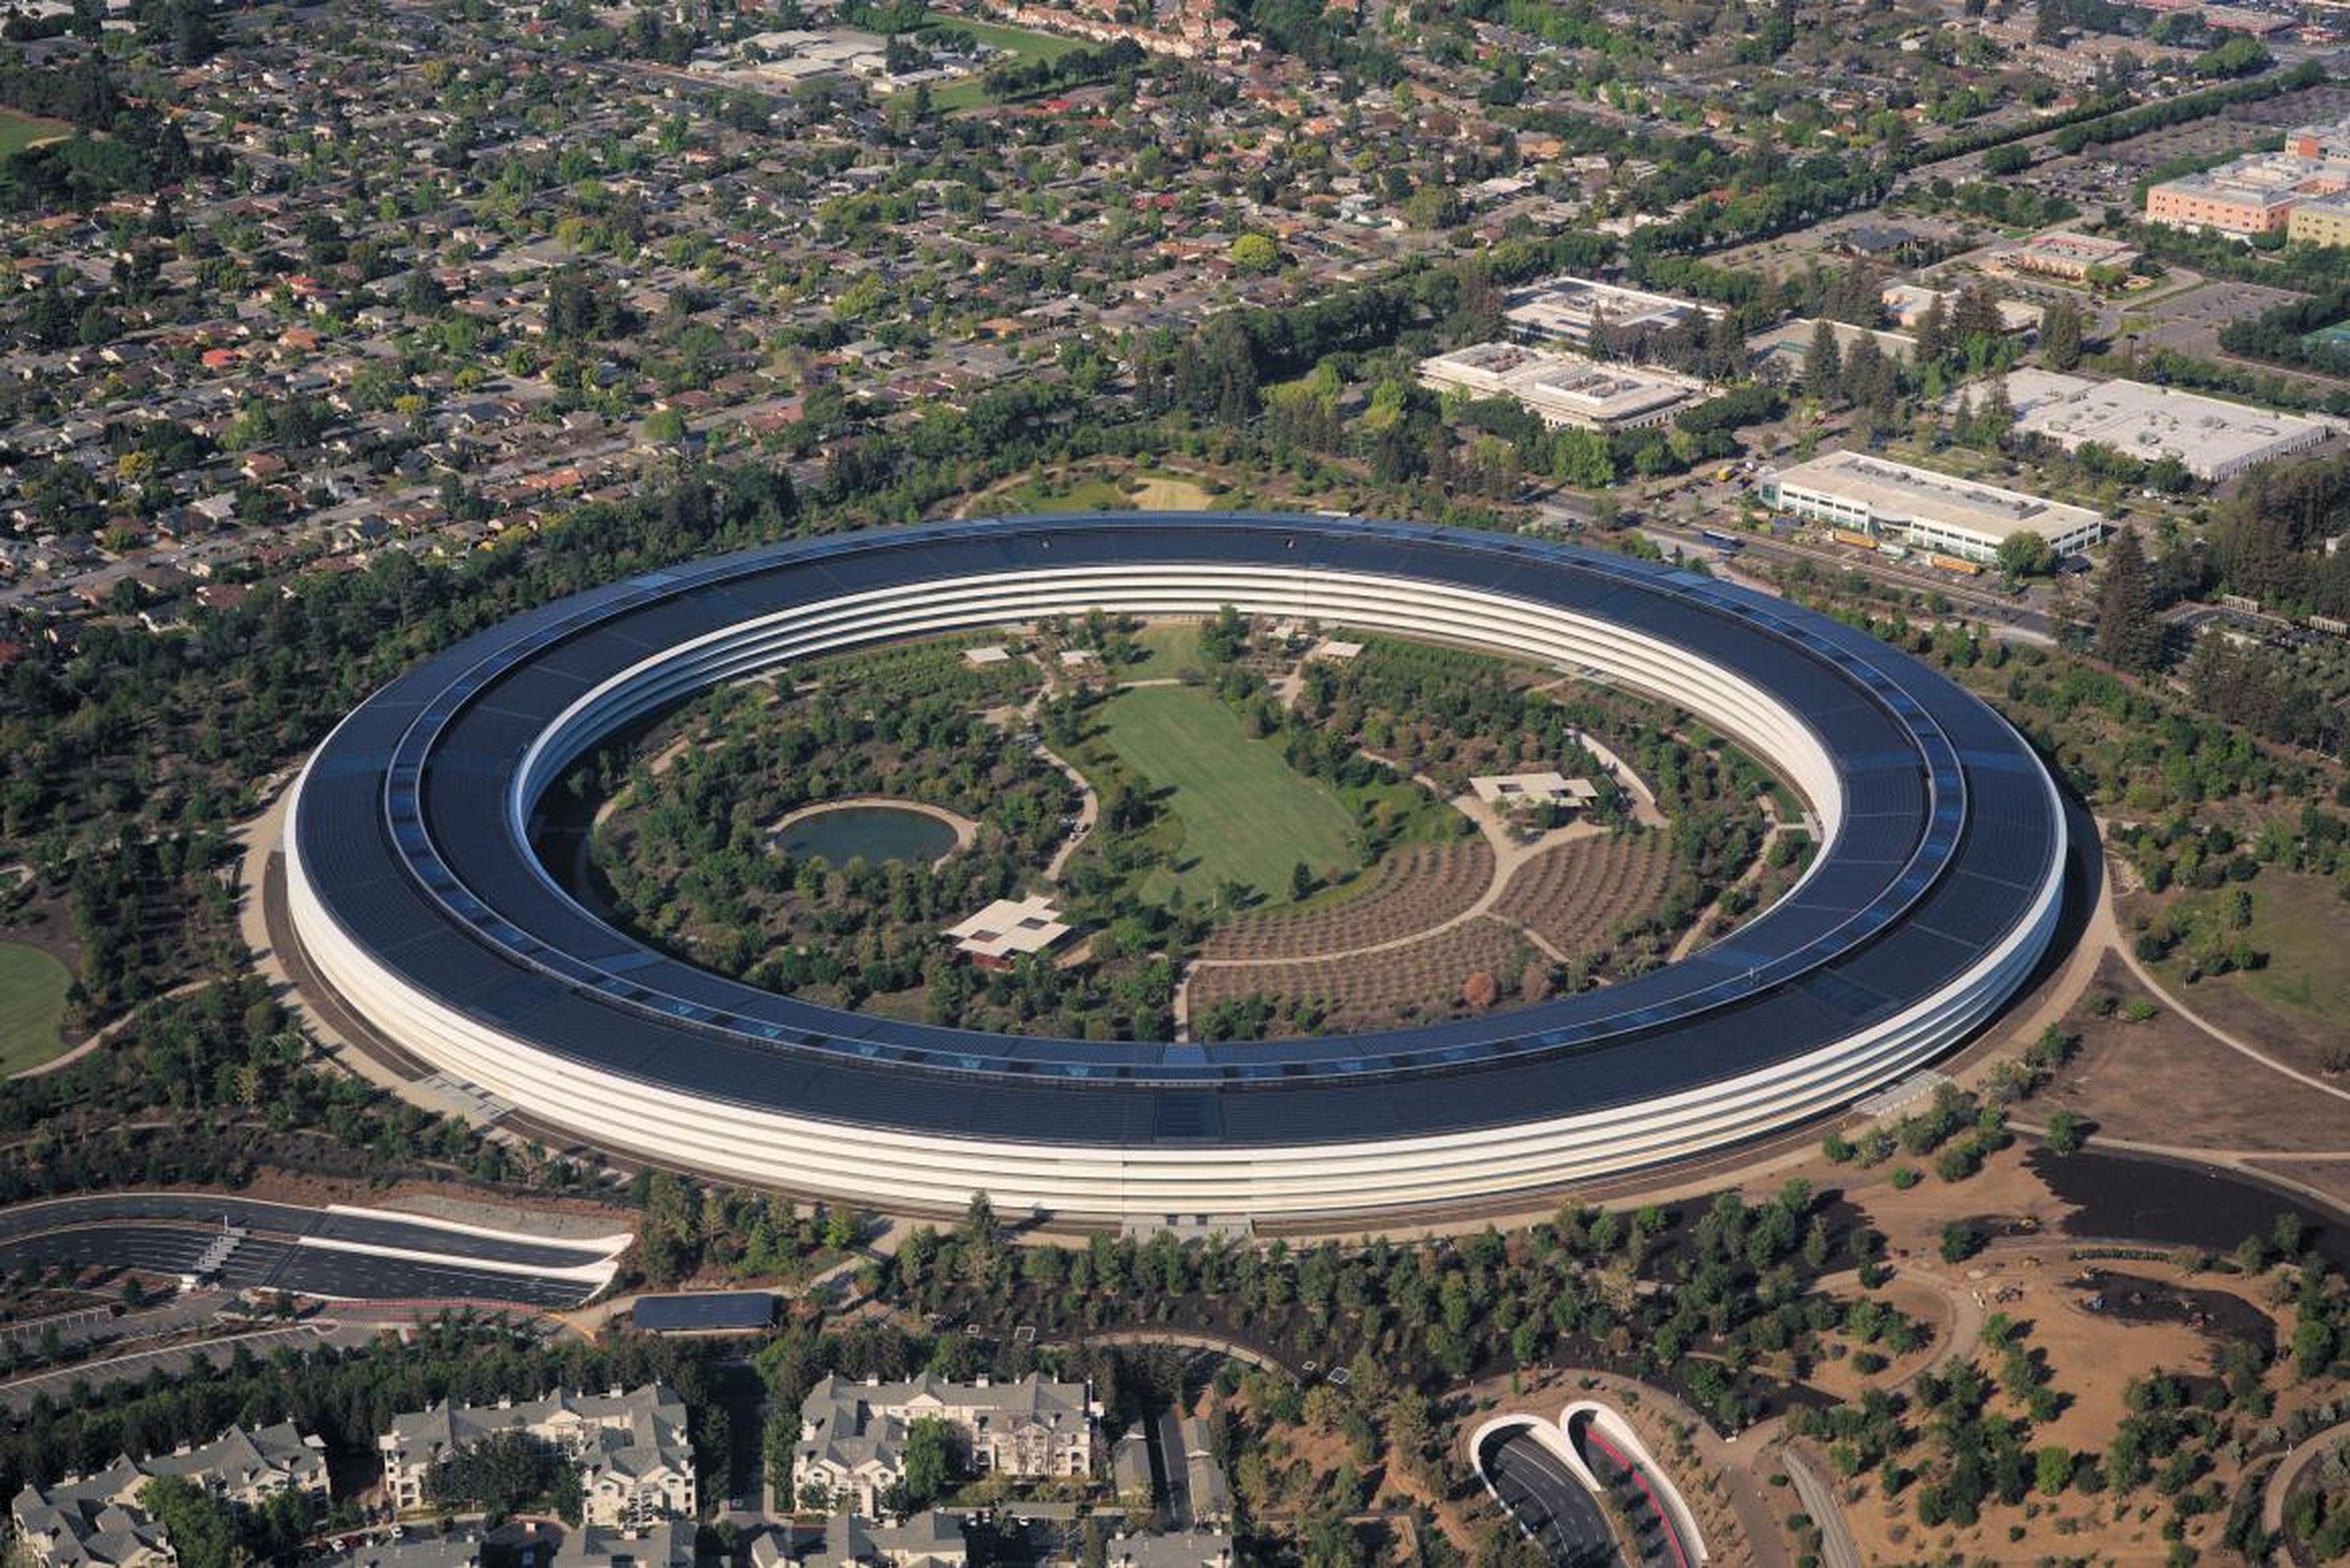 Apple's visitor center is located near its spaceship headquarters.